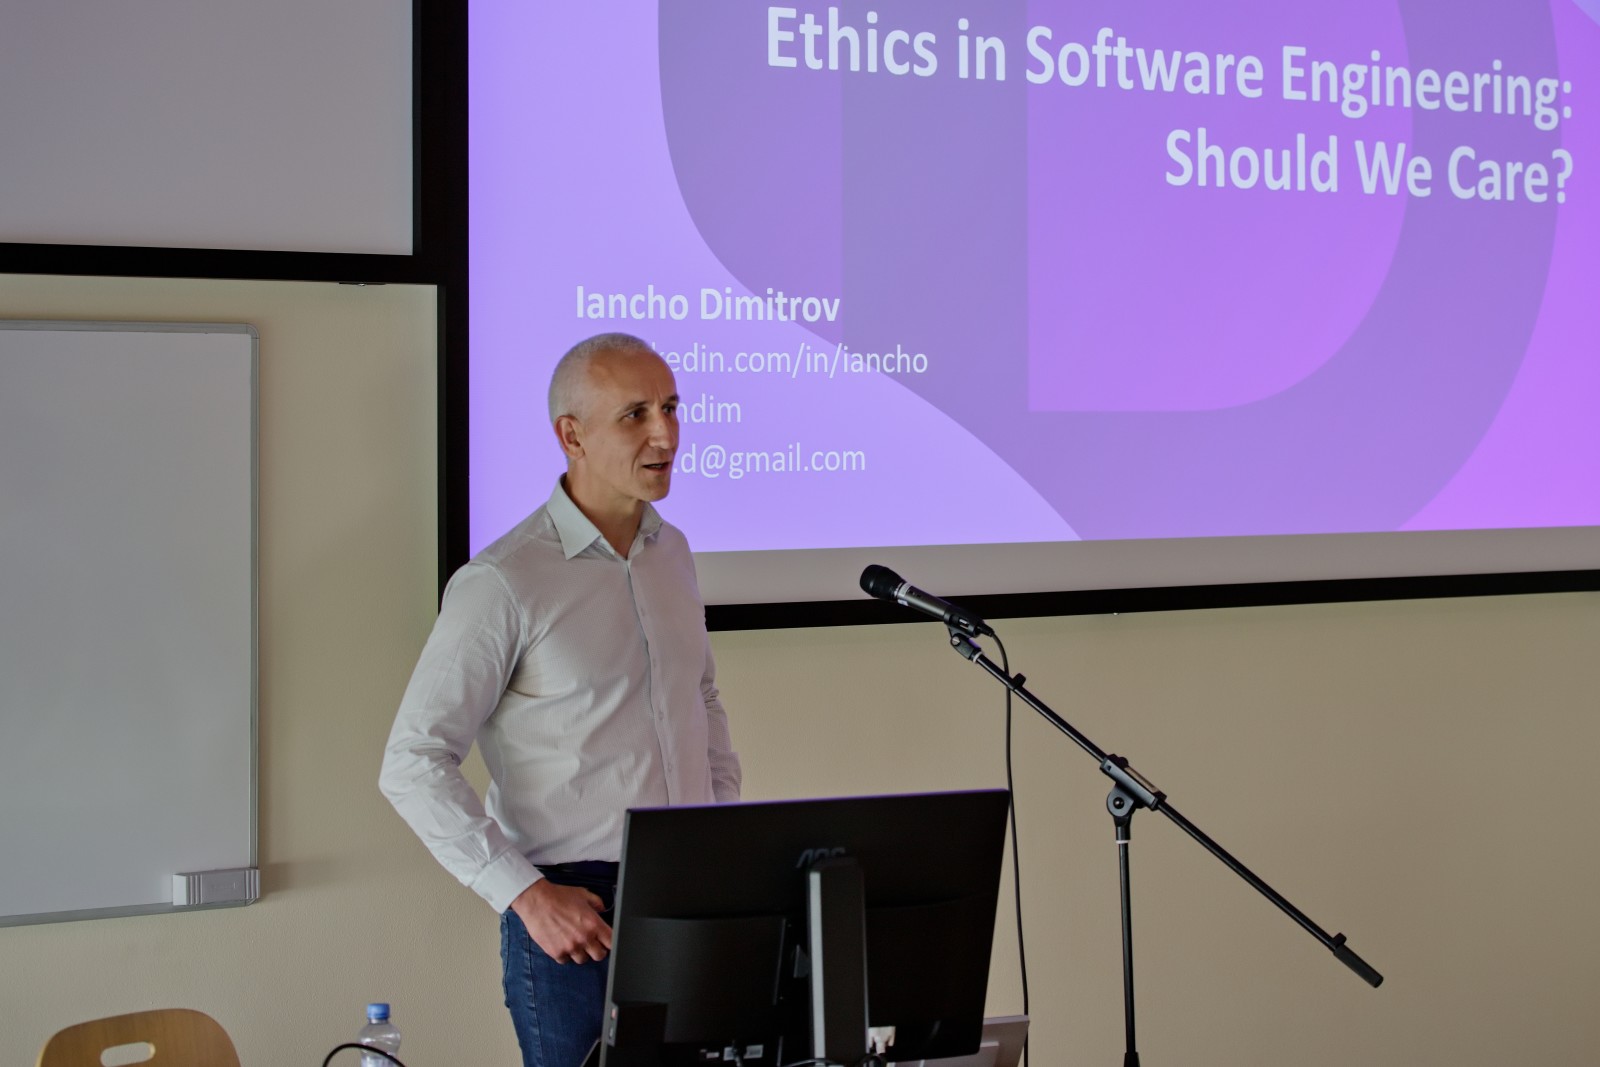 Ethics in Software Engineering - Should We Care?